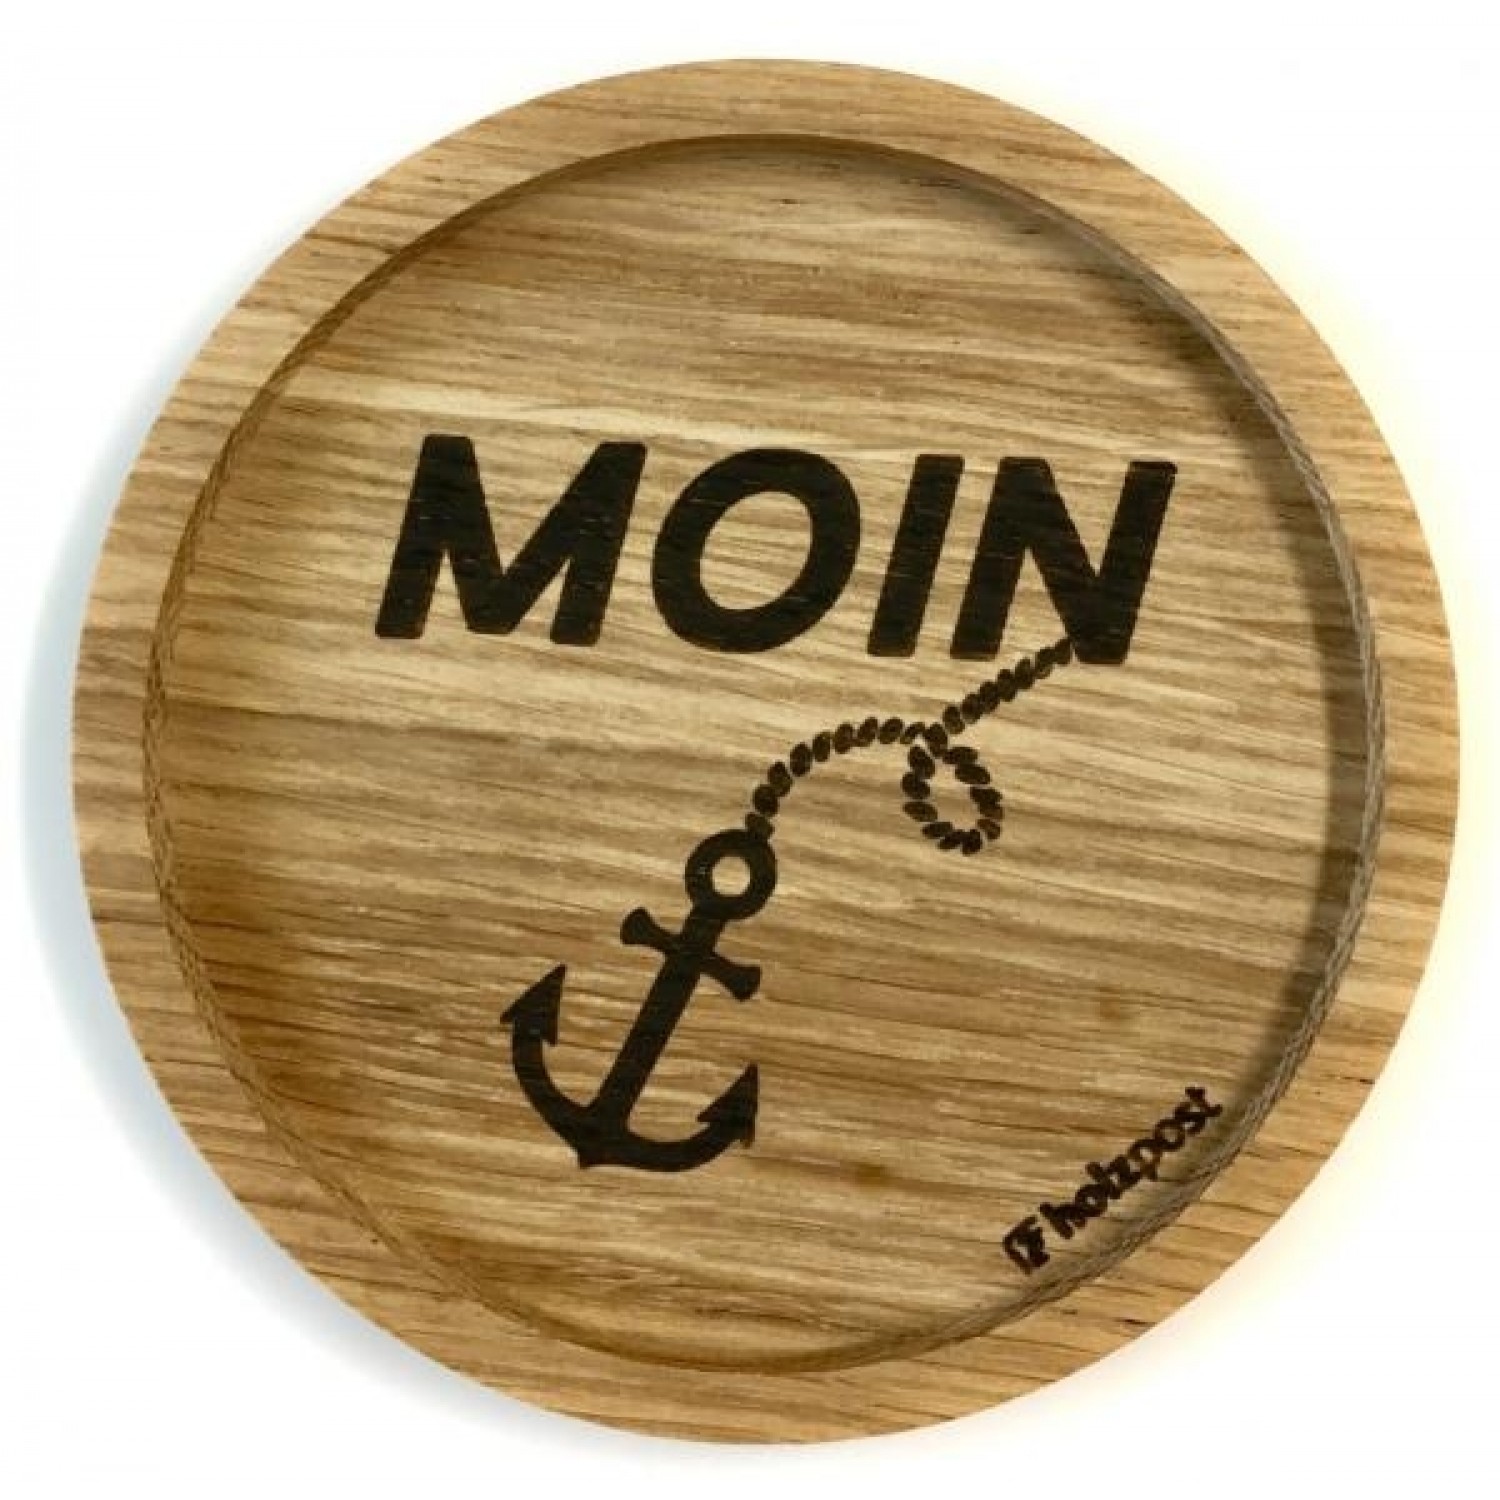 Solid Oak Wood Coaster Moin & Anchor » holzpost